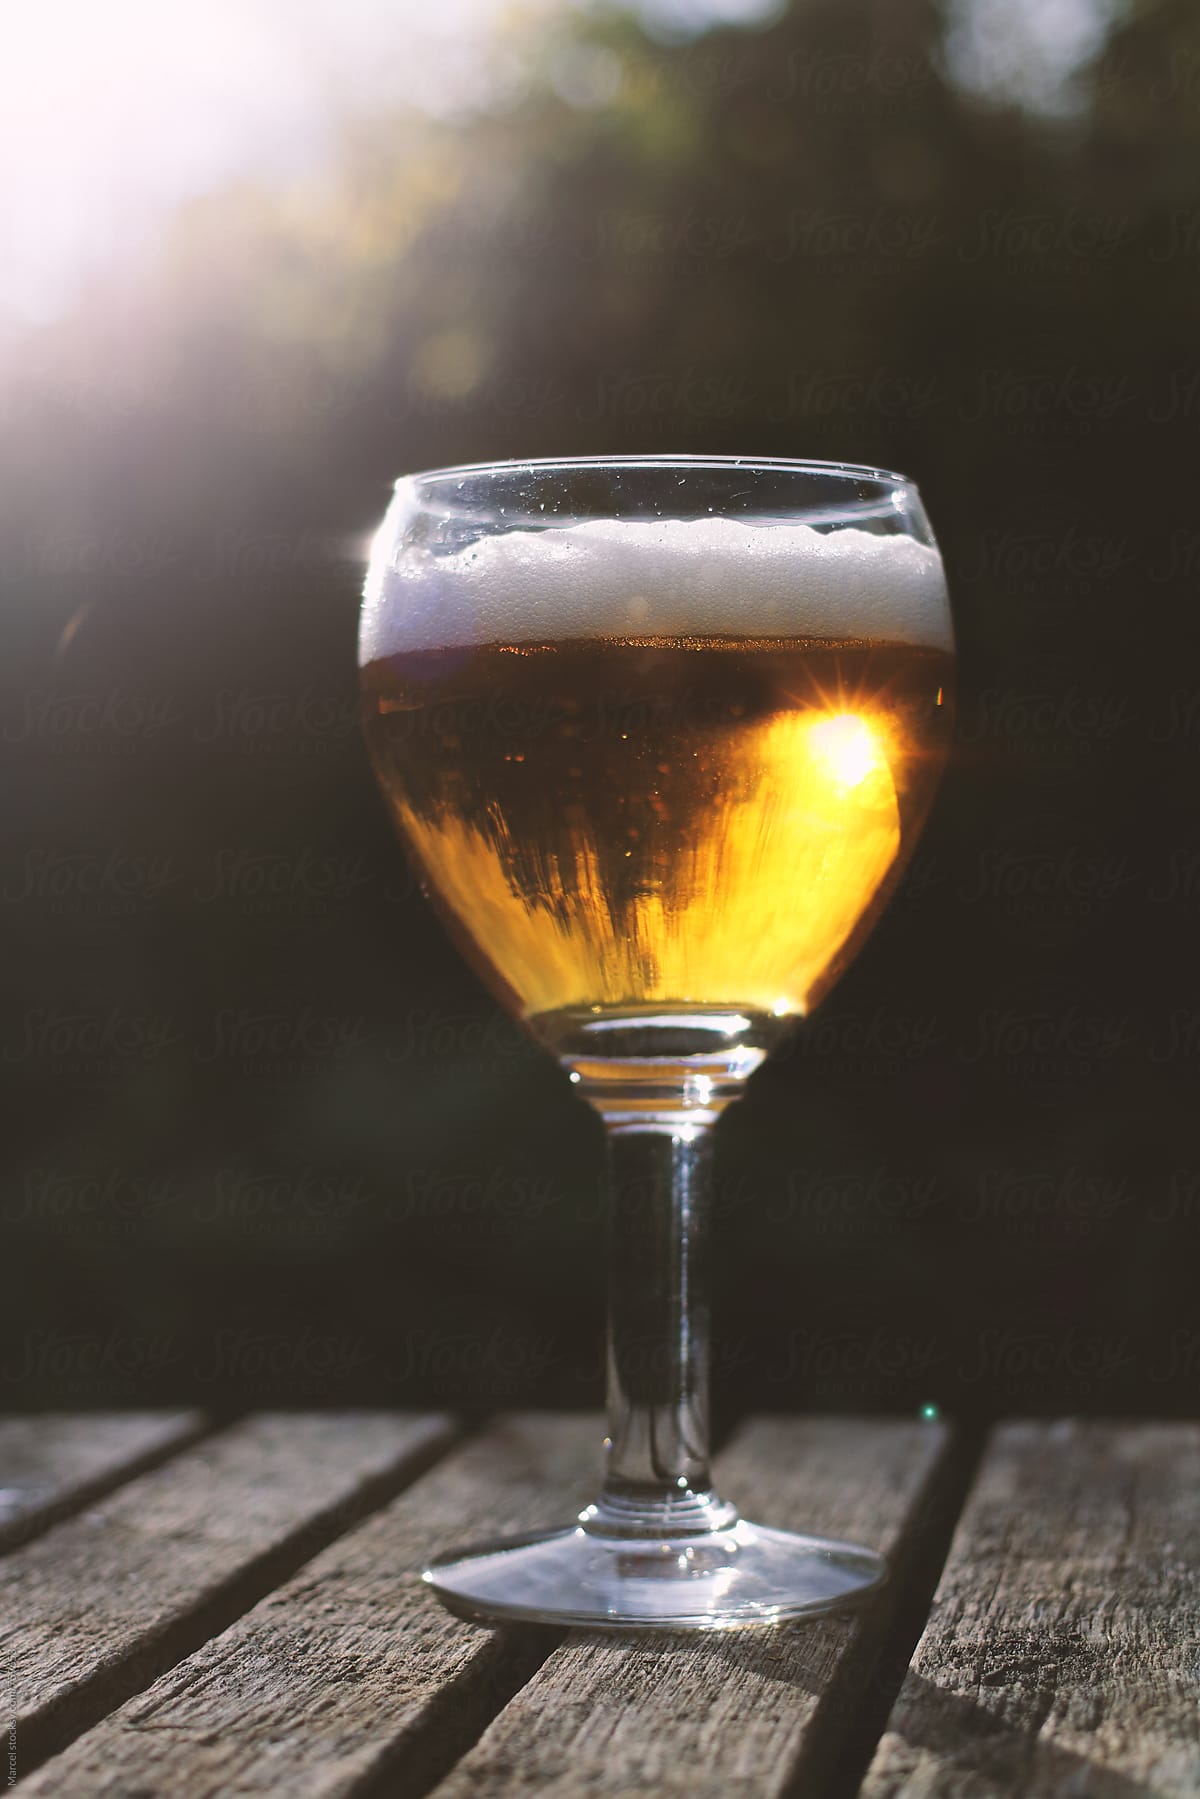 Big glass of beer on a garden table during the sunset